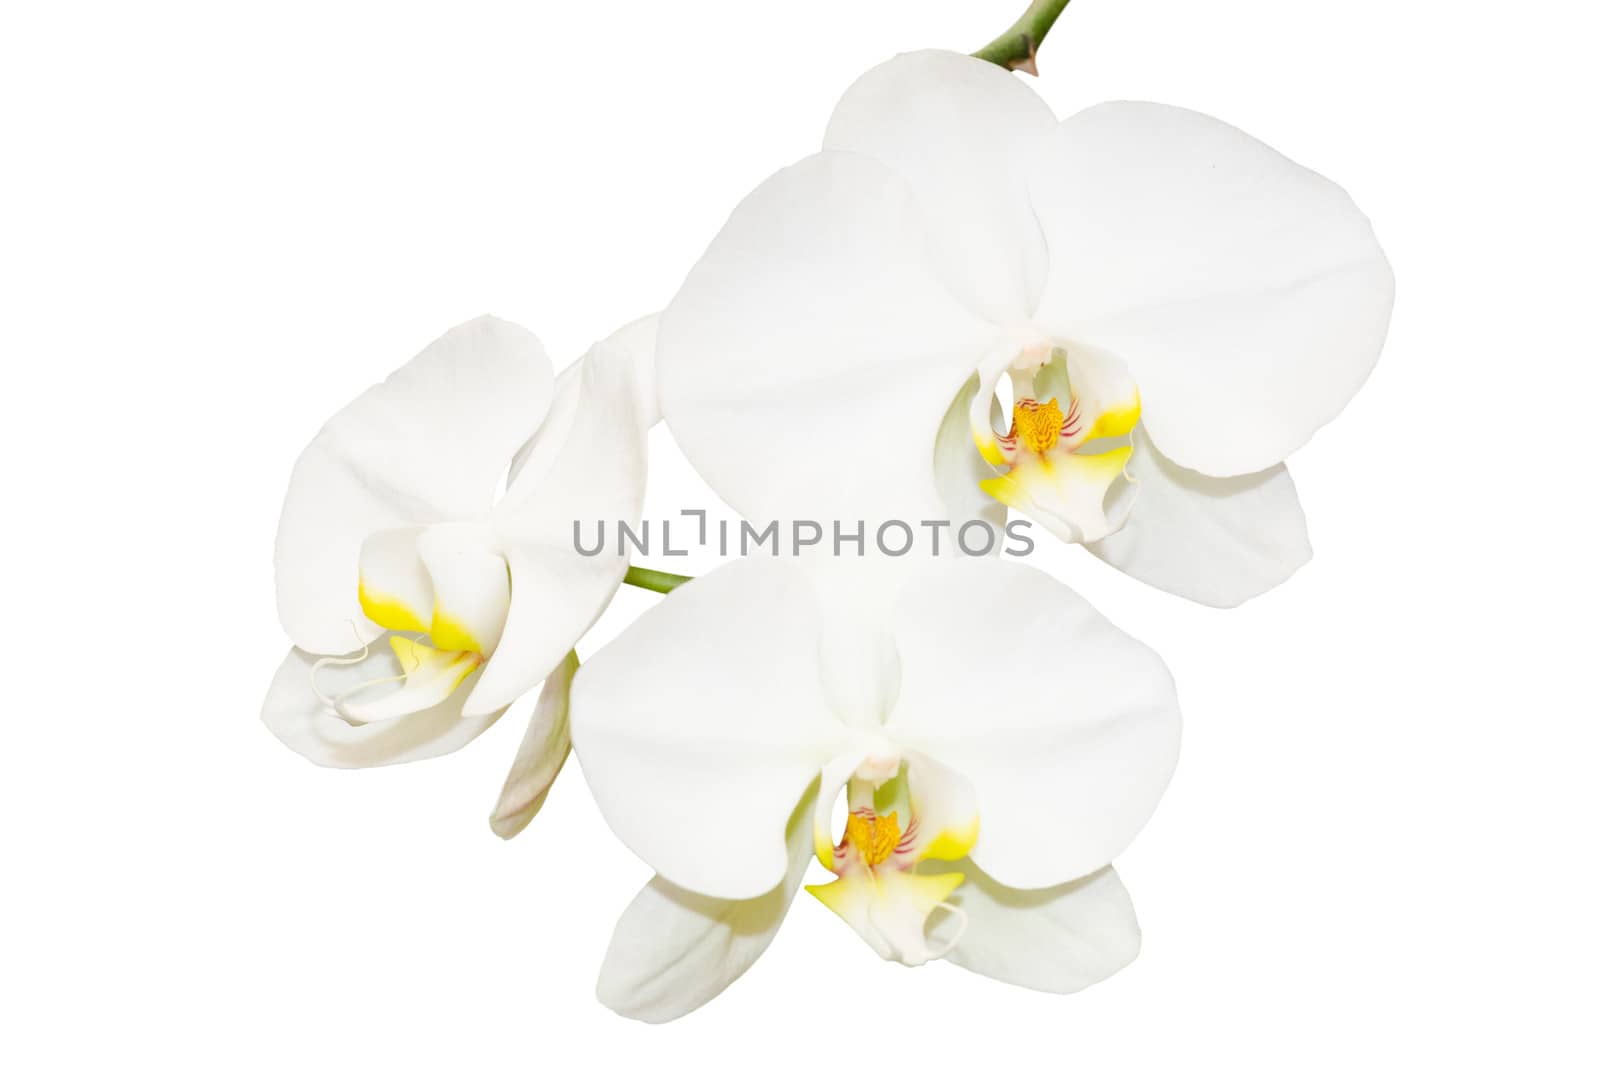 Three white orchids flowers on small branch isolate